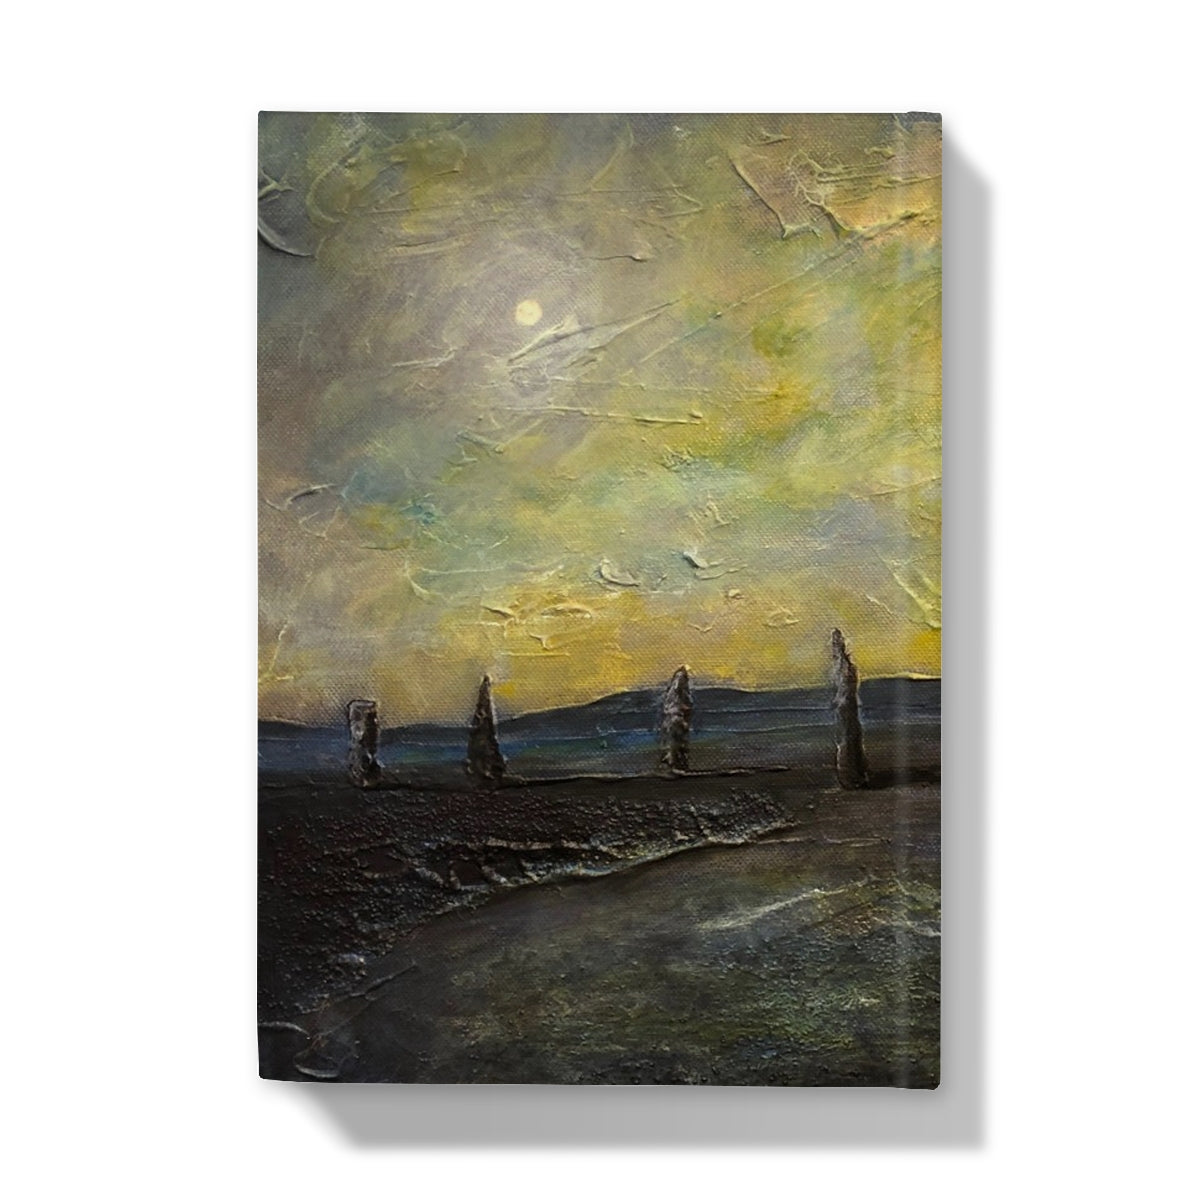 An Ethereal Ring Of Brodgar Art Gifts Hardback Journal-Journals & Notebooks-Orkney Art Gallery-Paintings, Prints, Homeware, Art Gifts From Scotland By Scottish Artist Kevin Hunter